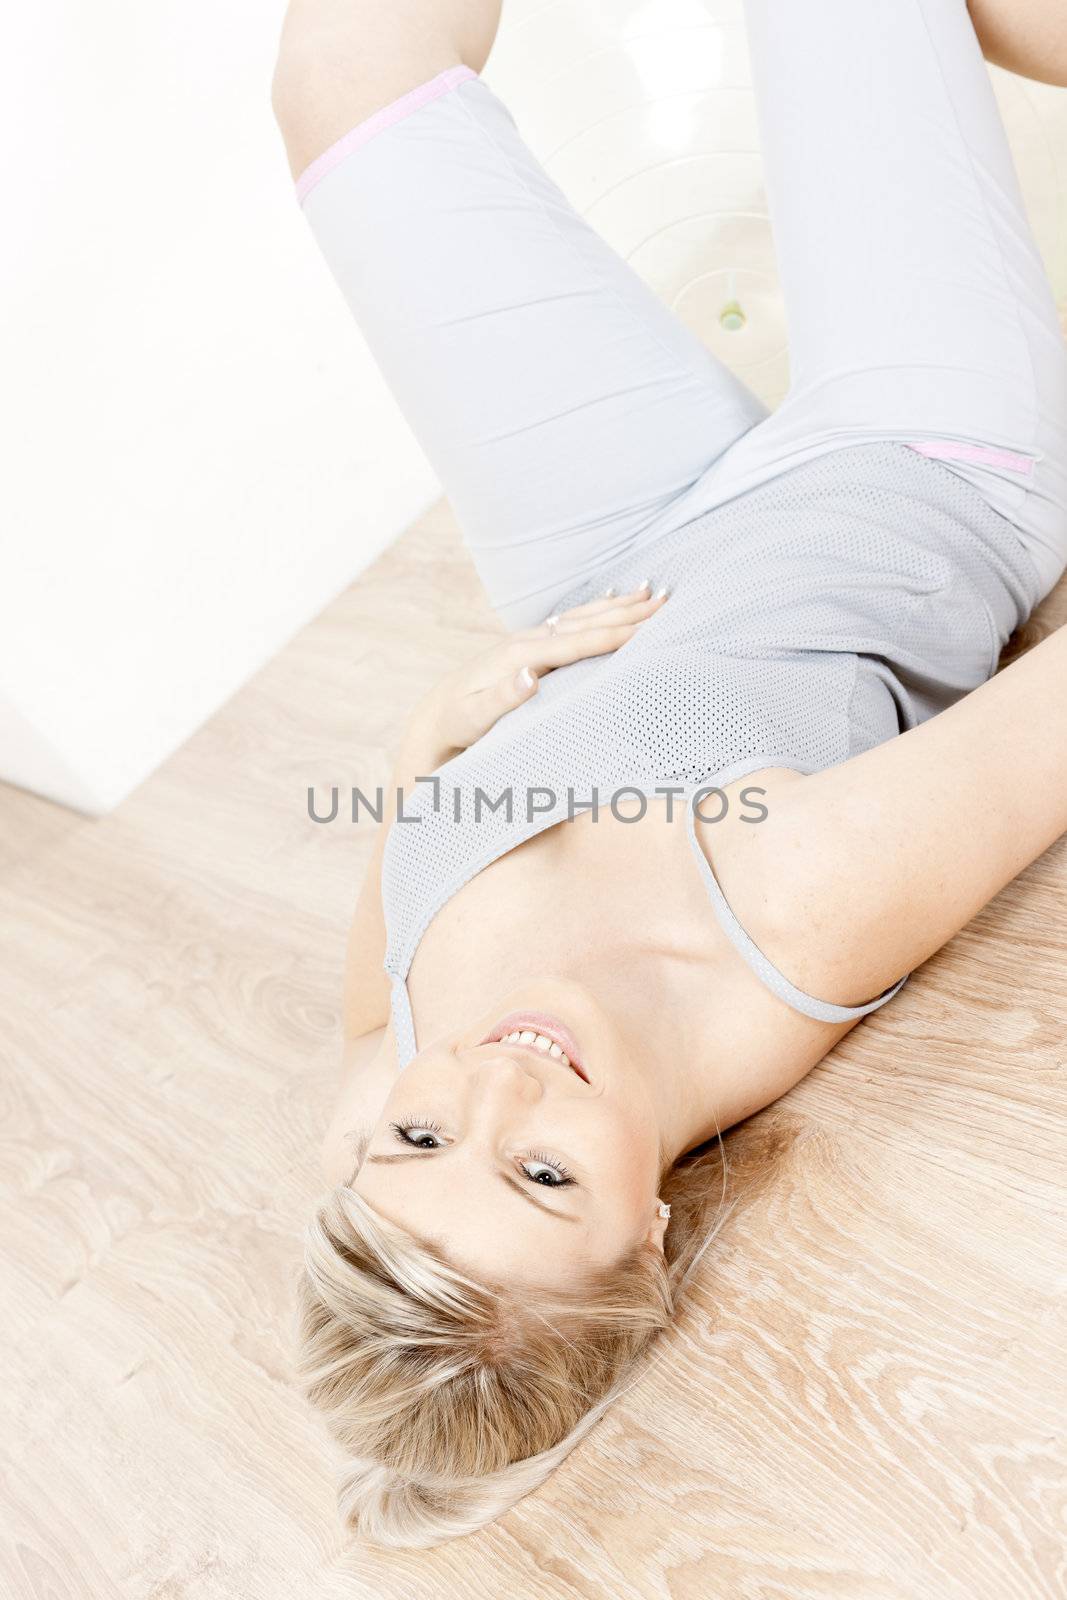 portrait of young woman doing excercises